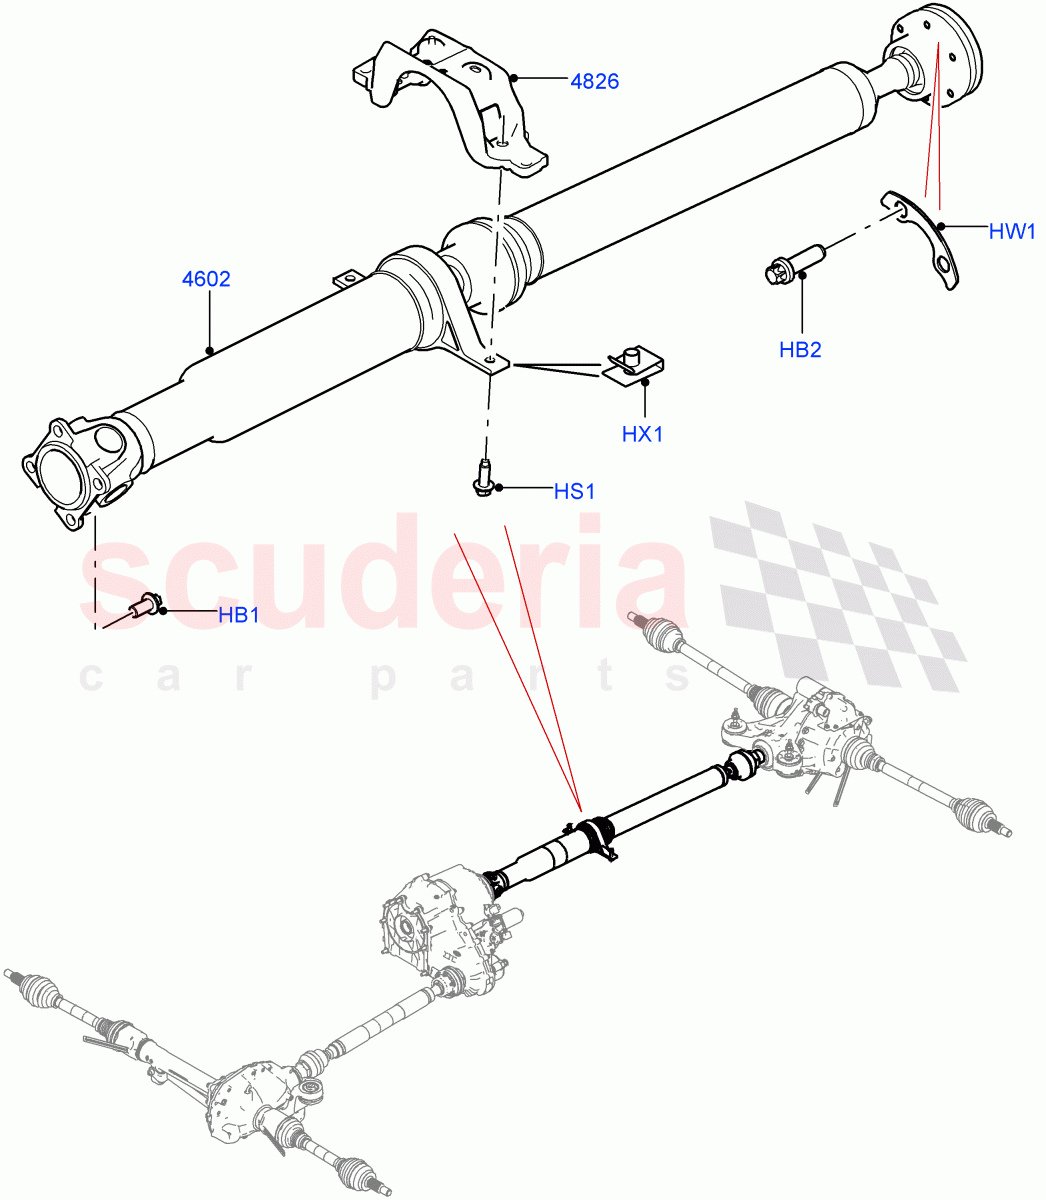 Drive Shaft - Rear Axle Drive(Propshaft, Nitra Plant Build)((V)FROMK2000001,(V)TOL2999999) of Land Rover Land Rover Discovery 5 (2017+) [3.0 I6 Turbo Diesel AJ20D6]